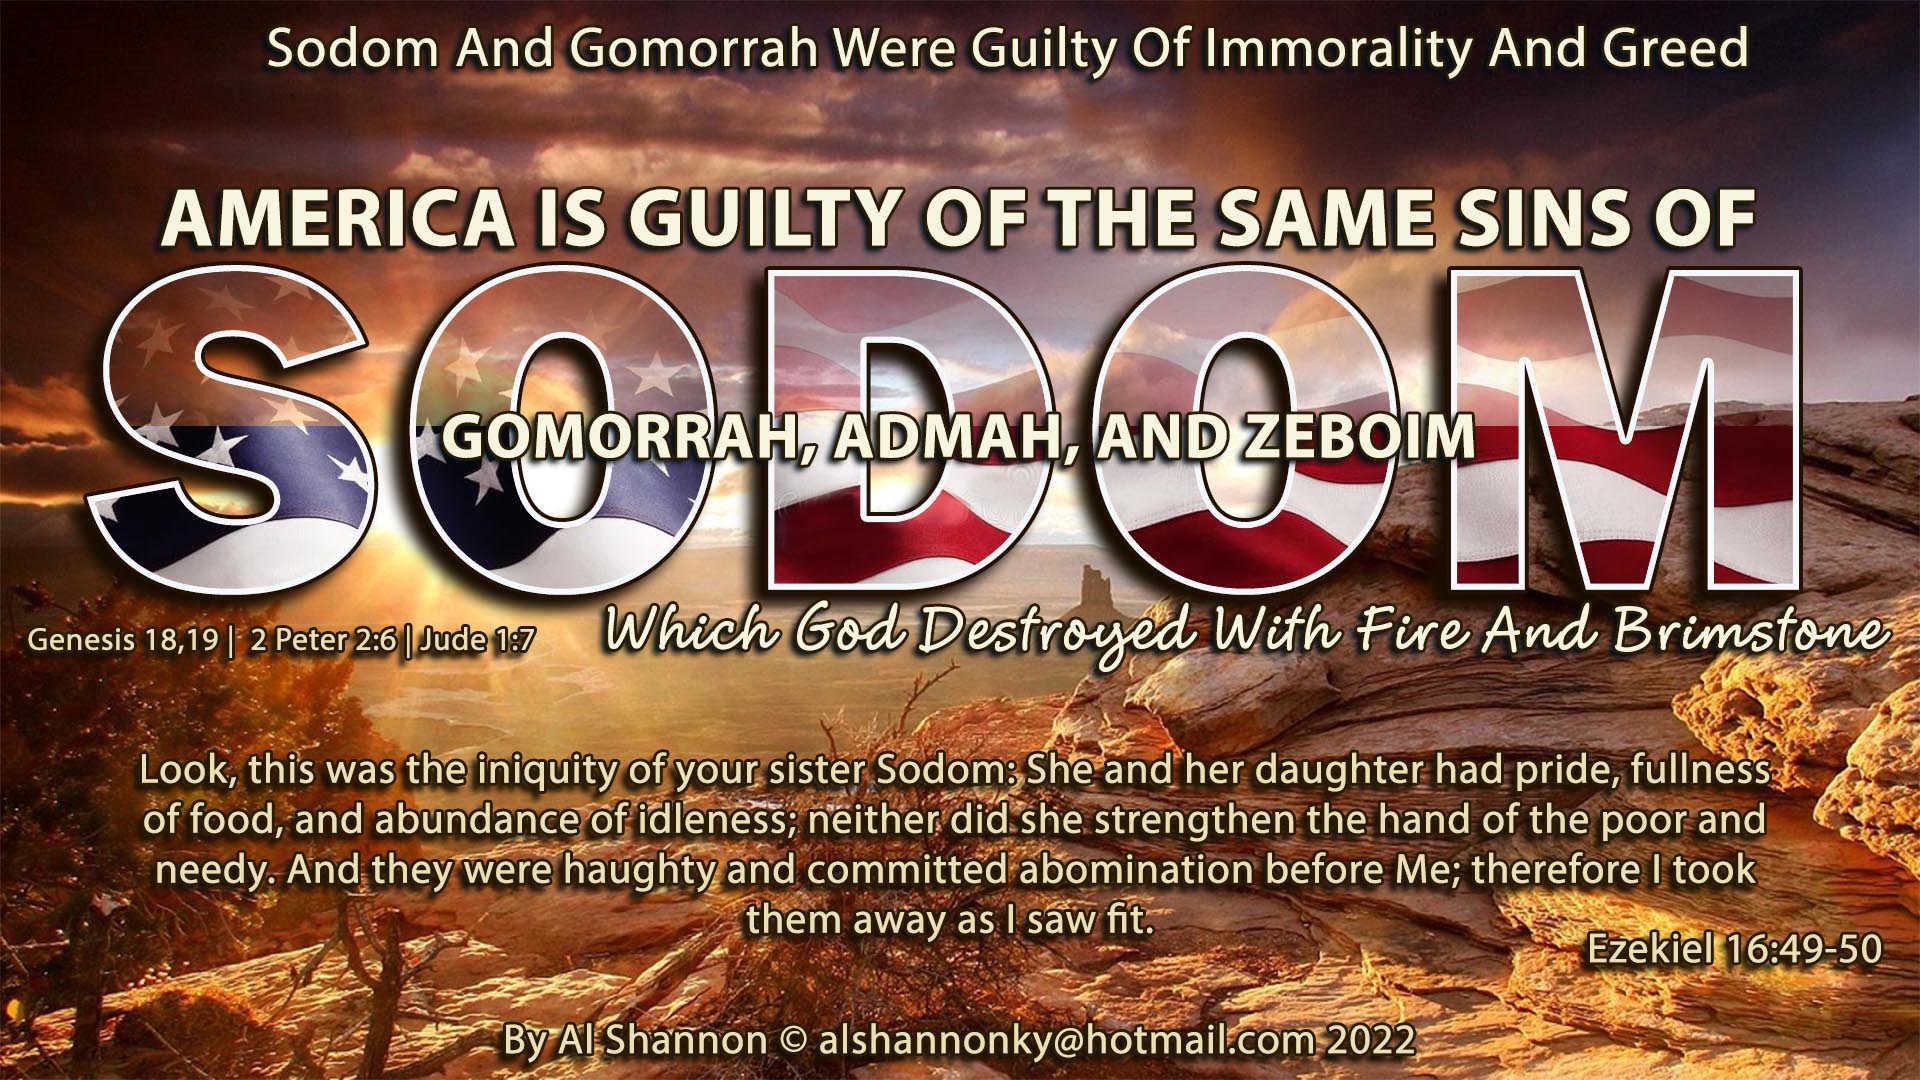 Sodom and Gomorrah Were Guilty Of Immorality And Greed